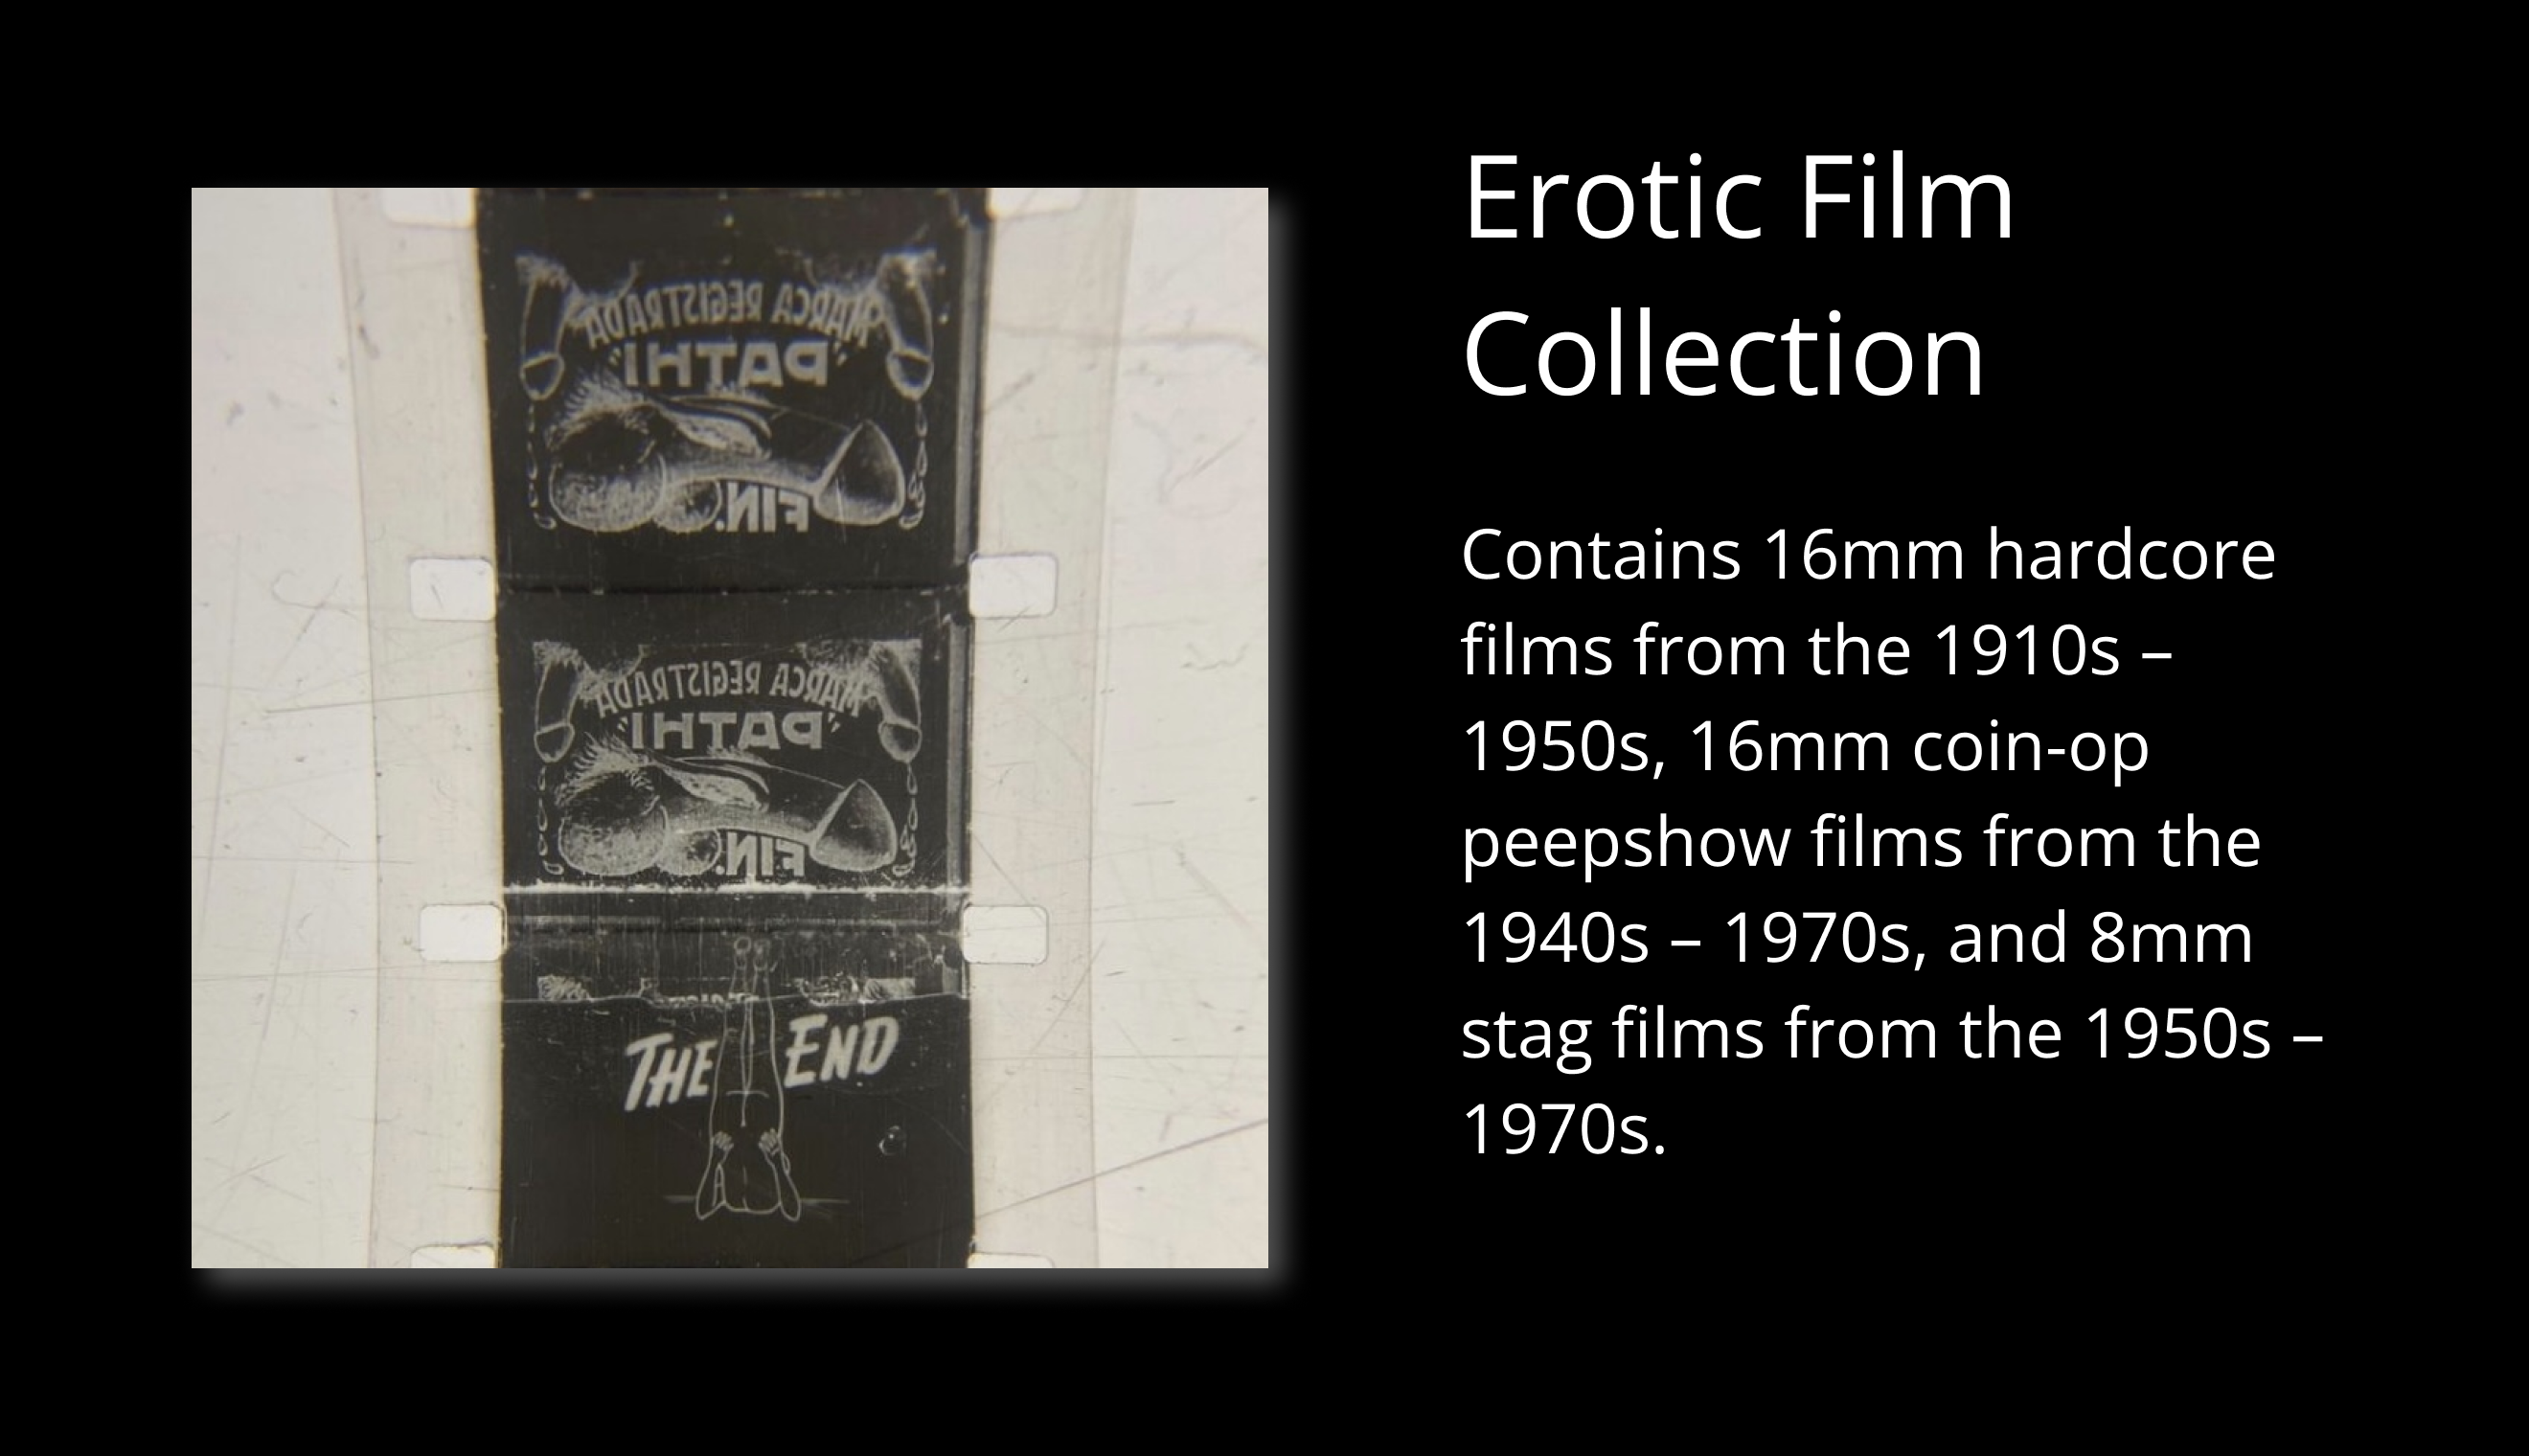 Slideshow image for Erotic Film Collection Thumbnail and Description on black background